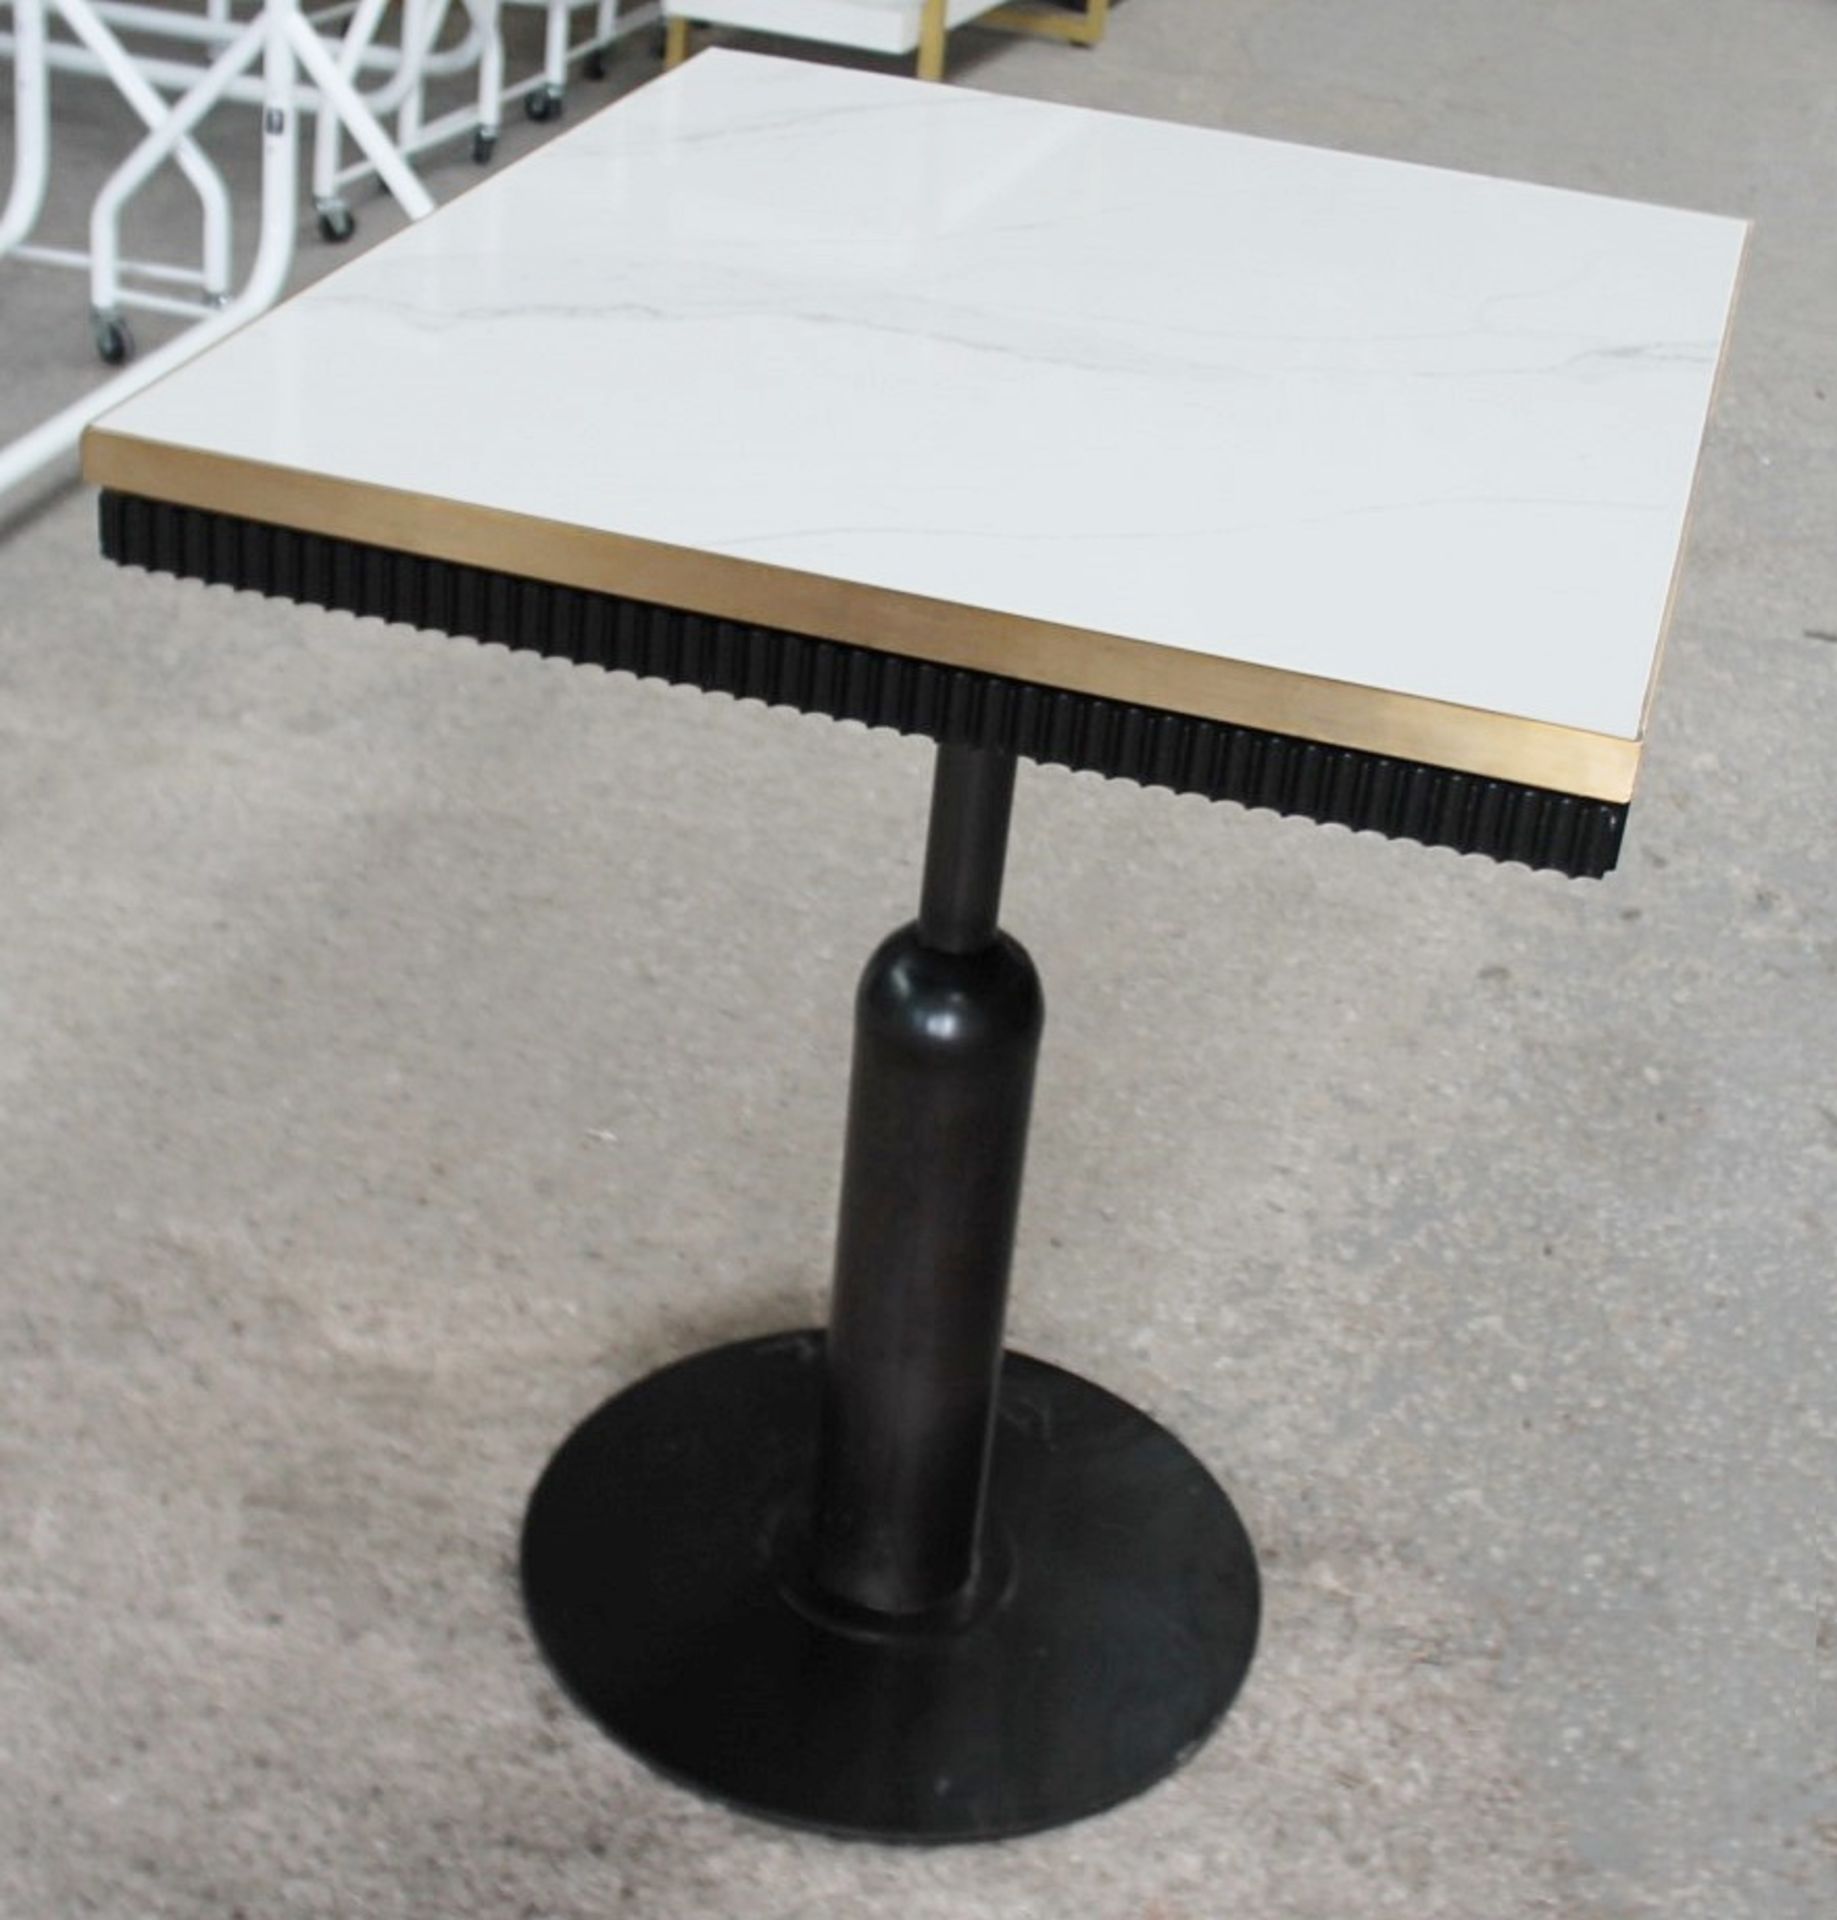 1 x Specially Commissioned Industrial-Style Marble-Topped Square Bistro Table With A Brass Trim - - Image 4 of 5